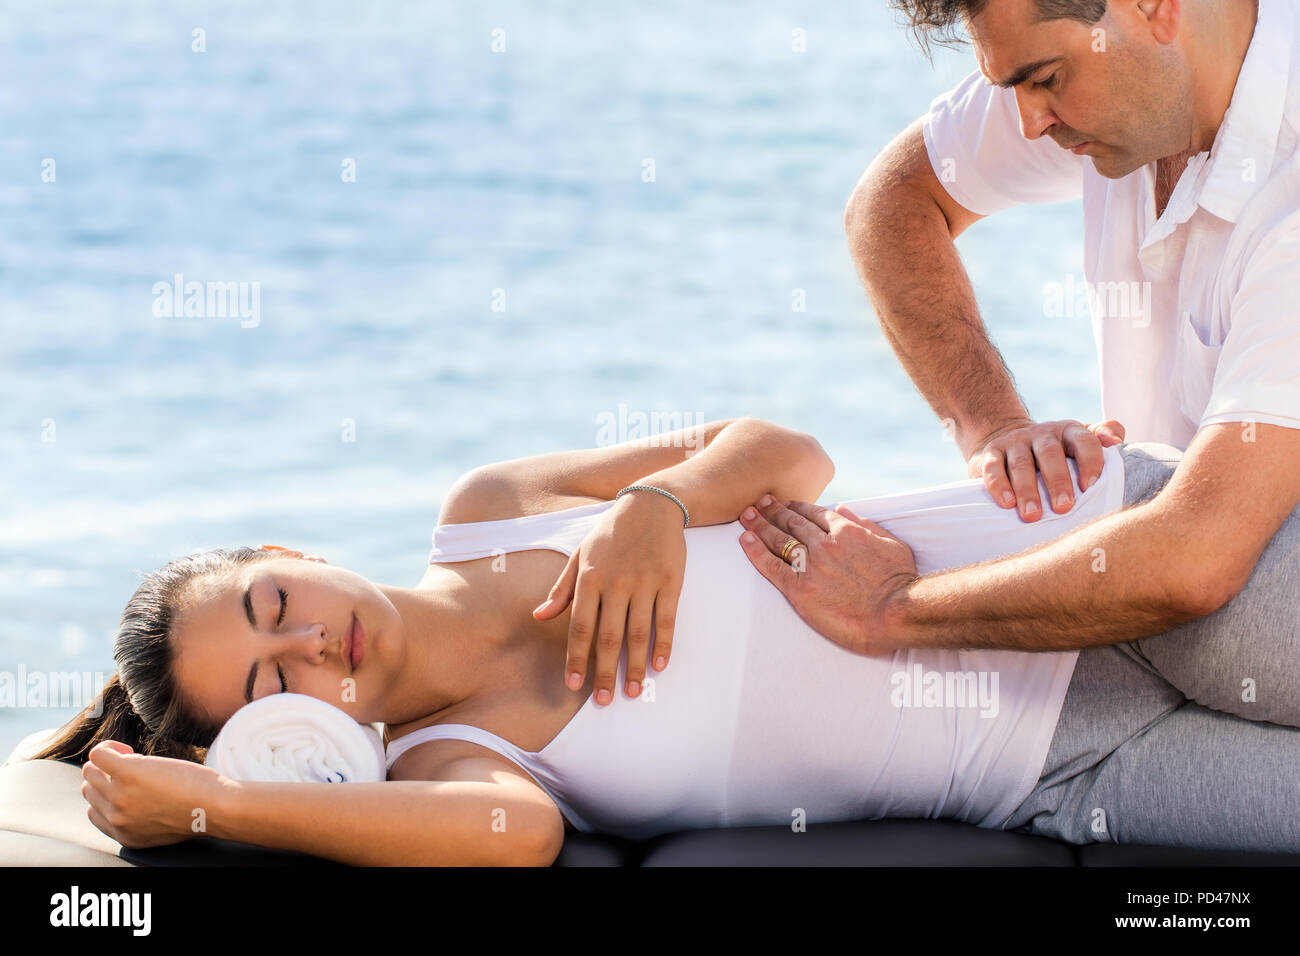 Close up portrait of male osteopath doing manipulative treatment on female hip. Therapist releasing lower back pain on woman against outdoor sea side  Stock Photo